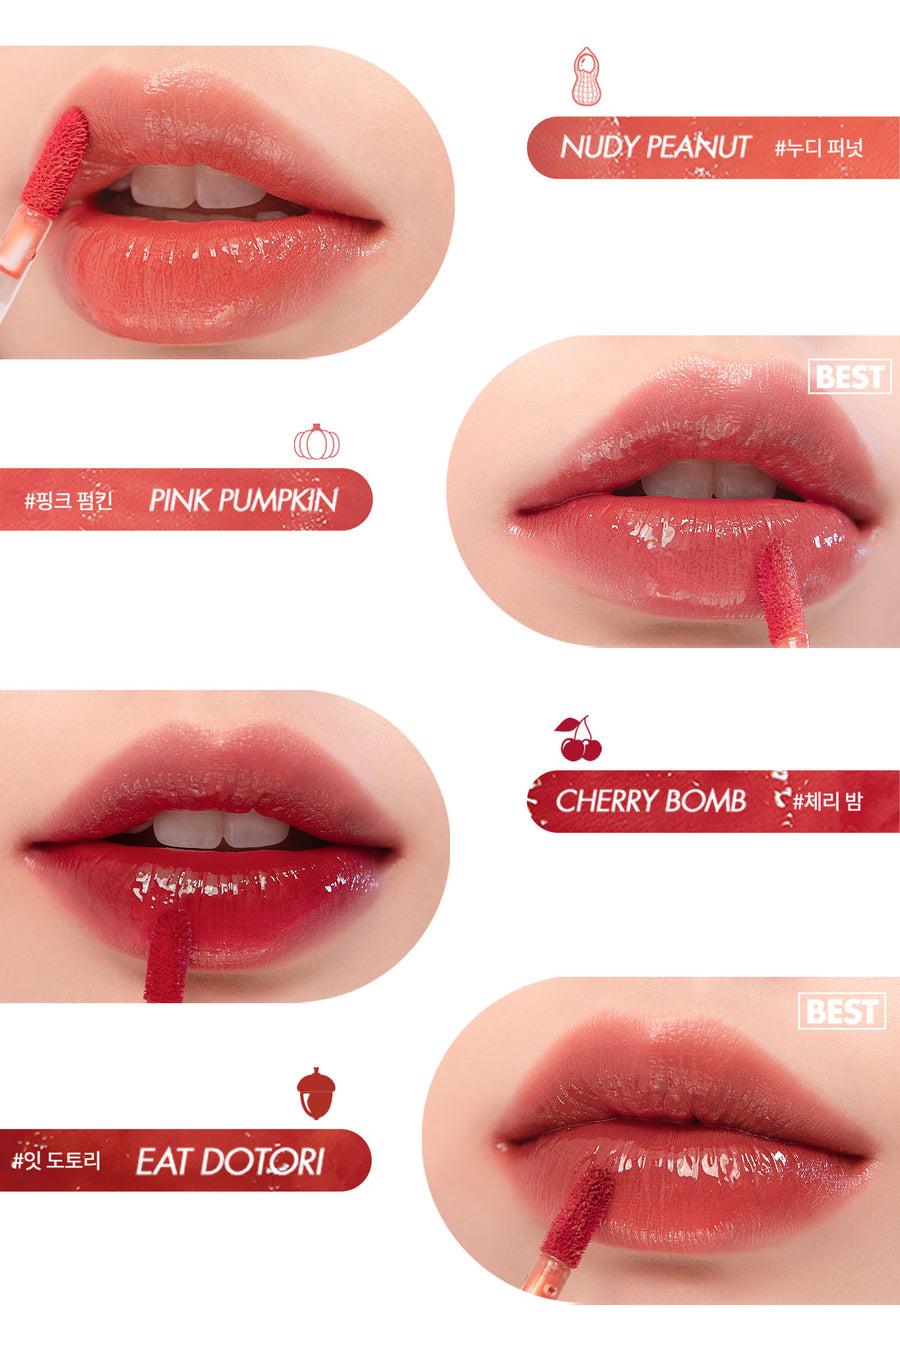 glossy lip tint that doesn't smudge